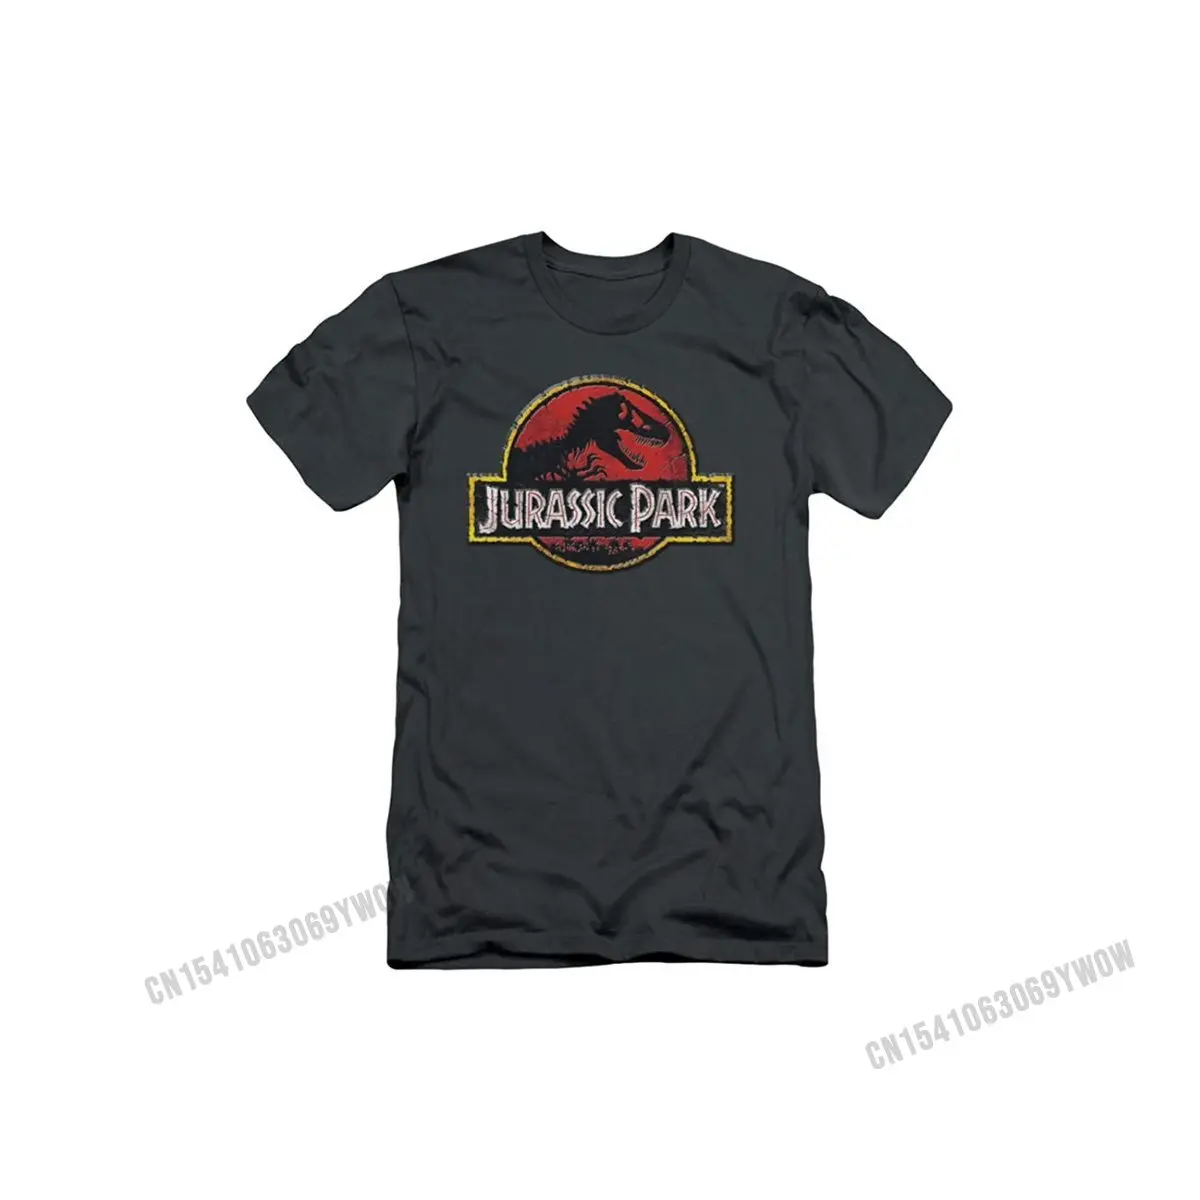 

Jurassic Park Action Film Steven Spielberg Stone Logo Adult Slim T-Shirt Tee Design T Shirts for Male Graphic Top T-shirts